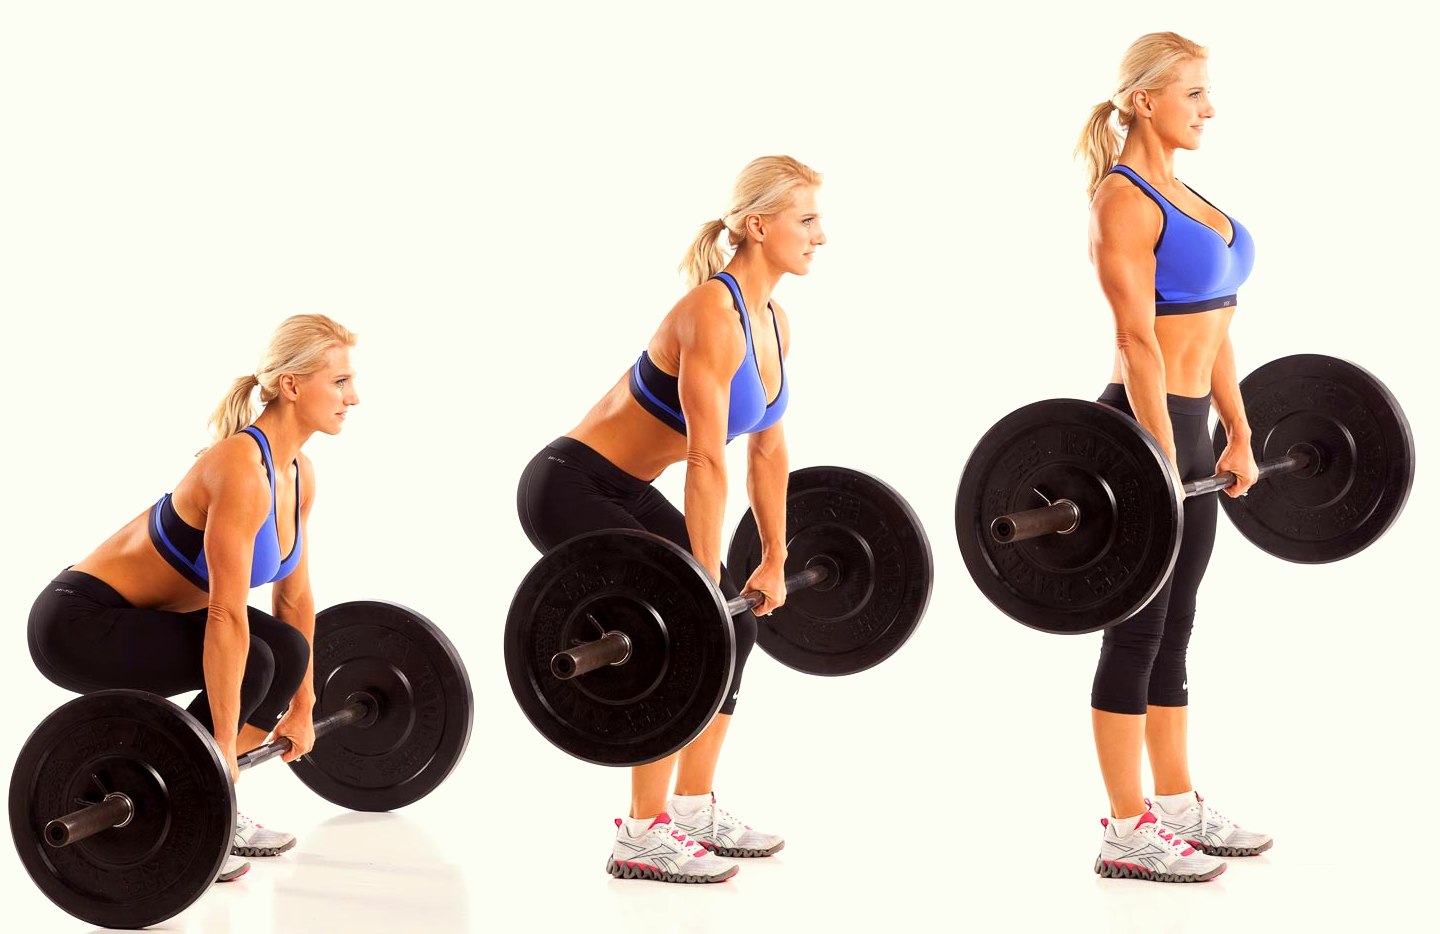 Dead lift with barbells